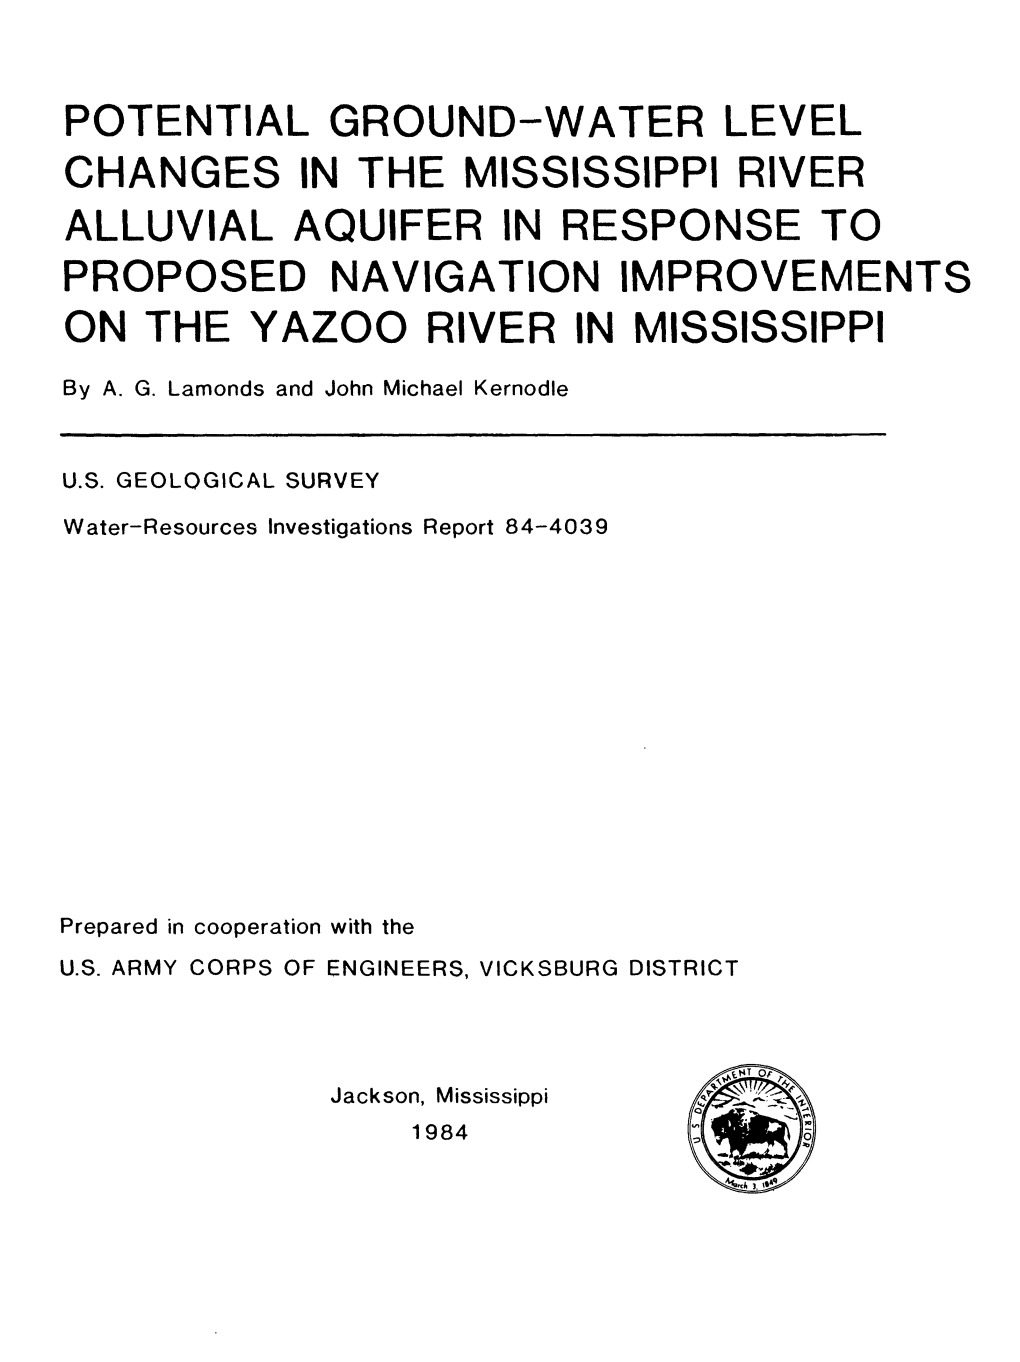 Potential Ground-Water Level Changes in the Mississippi River Alluvial Aquifer in Response to Proposed Navigation Improvements on the Yazoo River in Mississippi